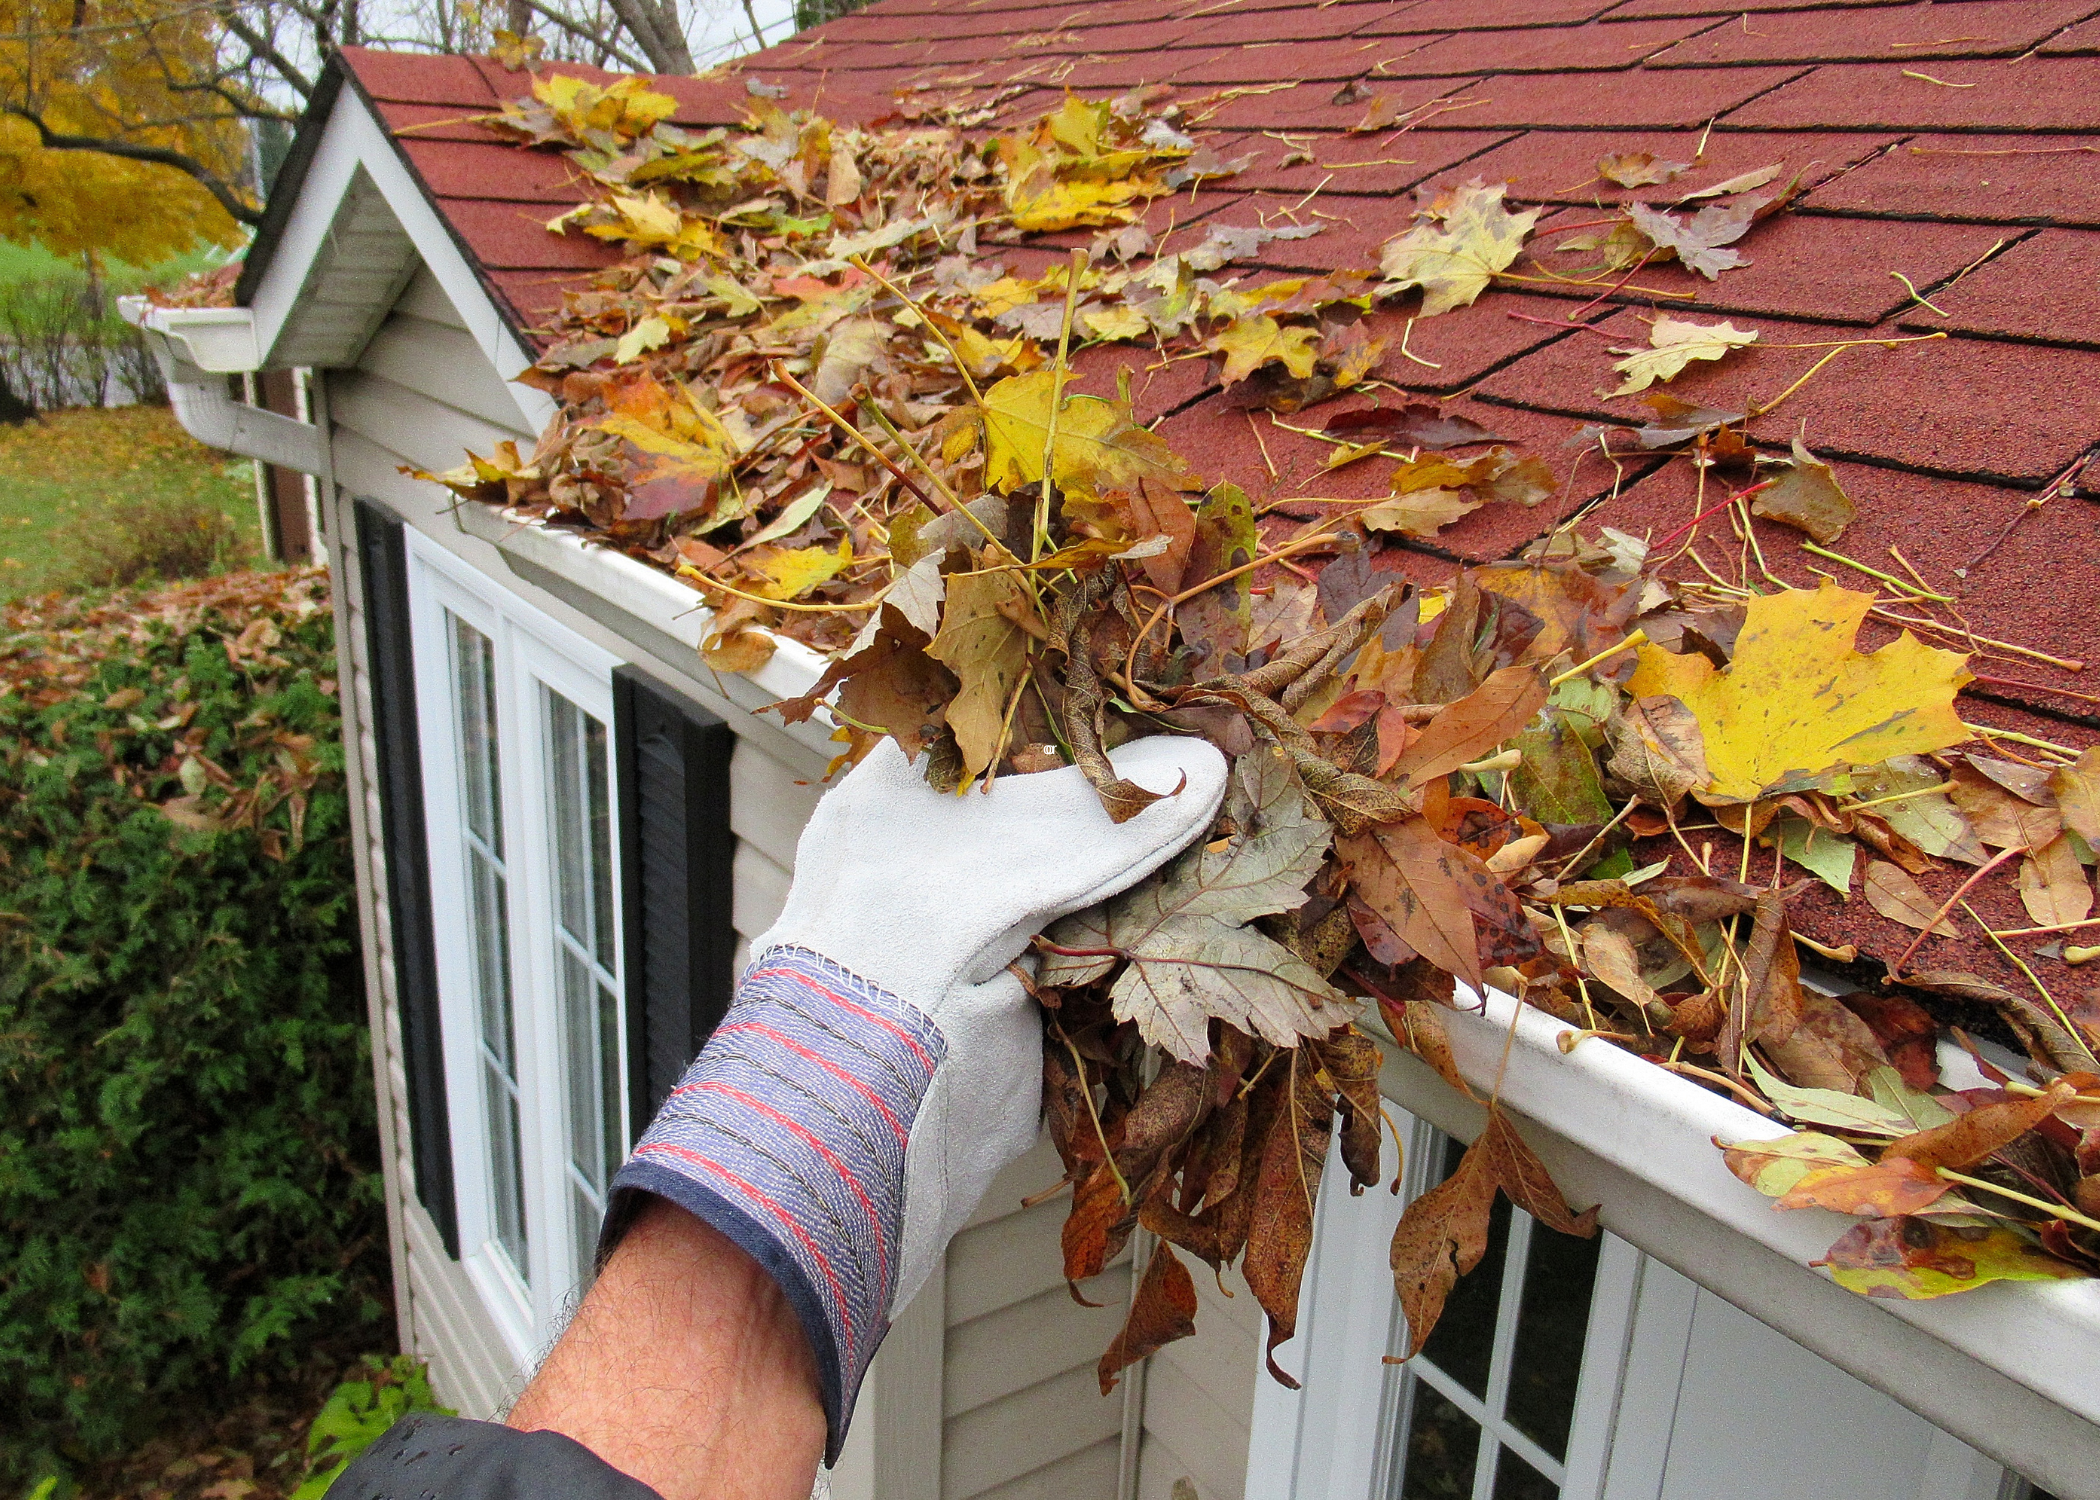 hand wearing glove cleaning leaves out of gutter close up